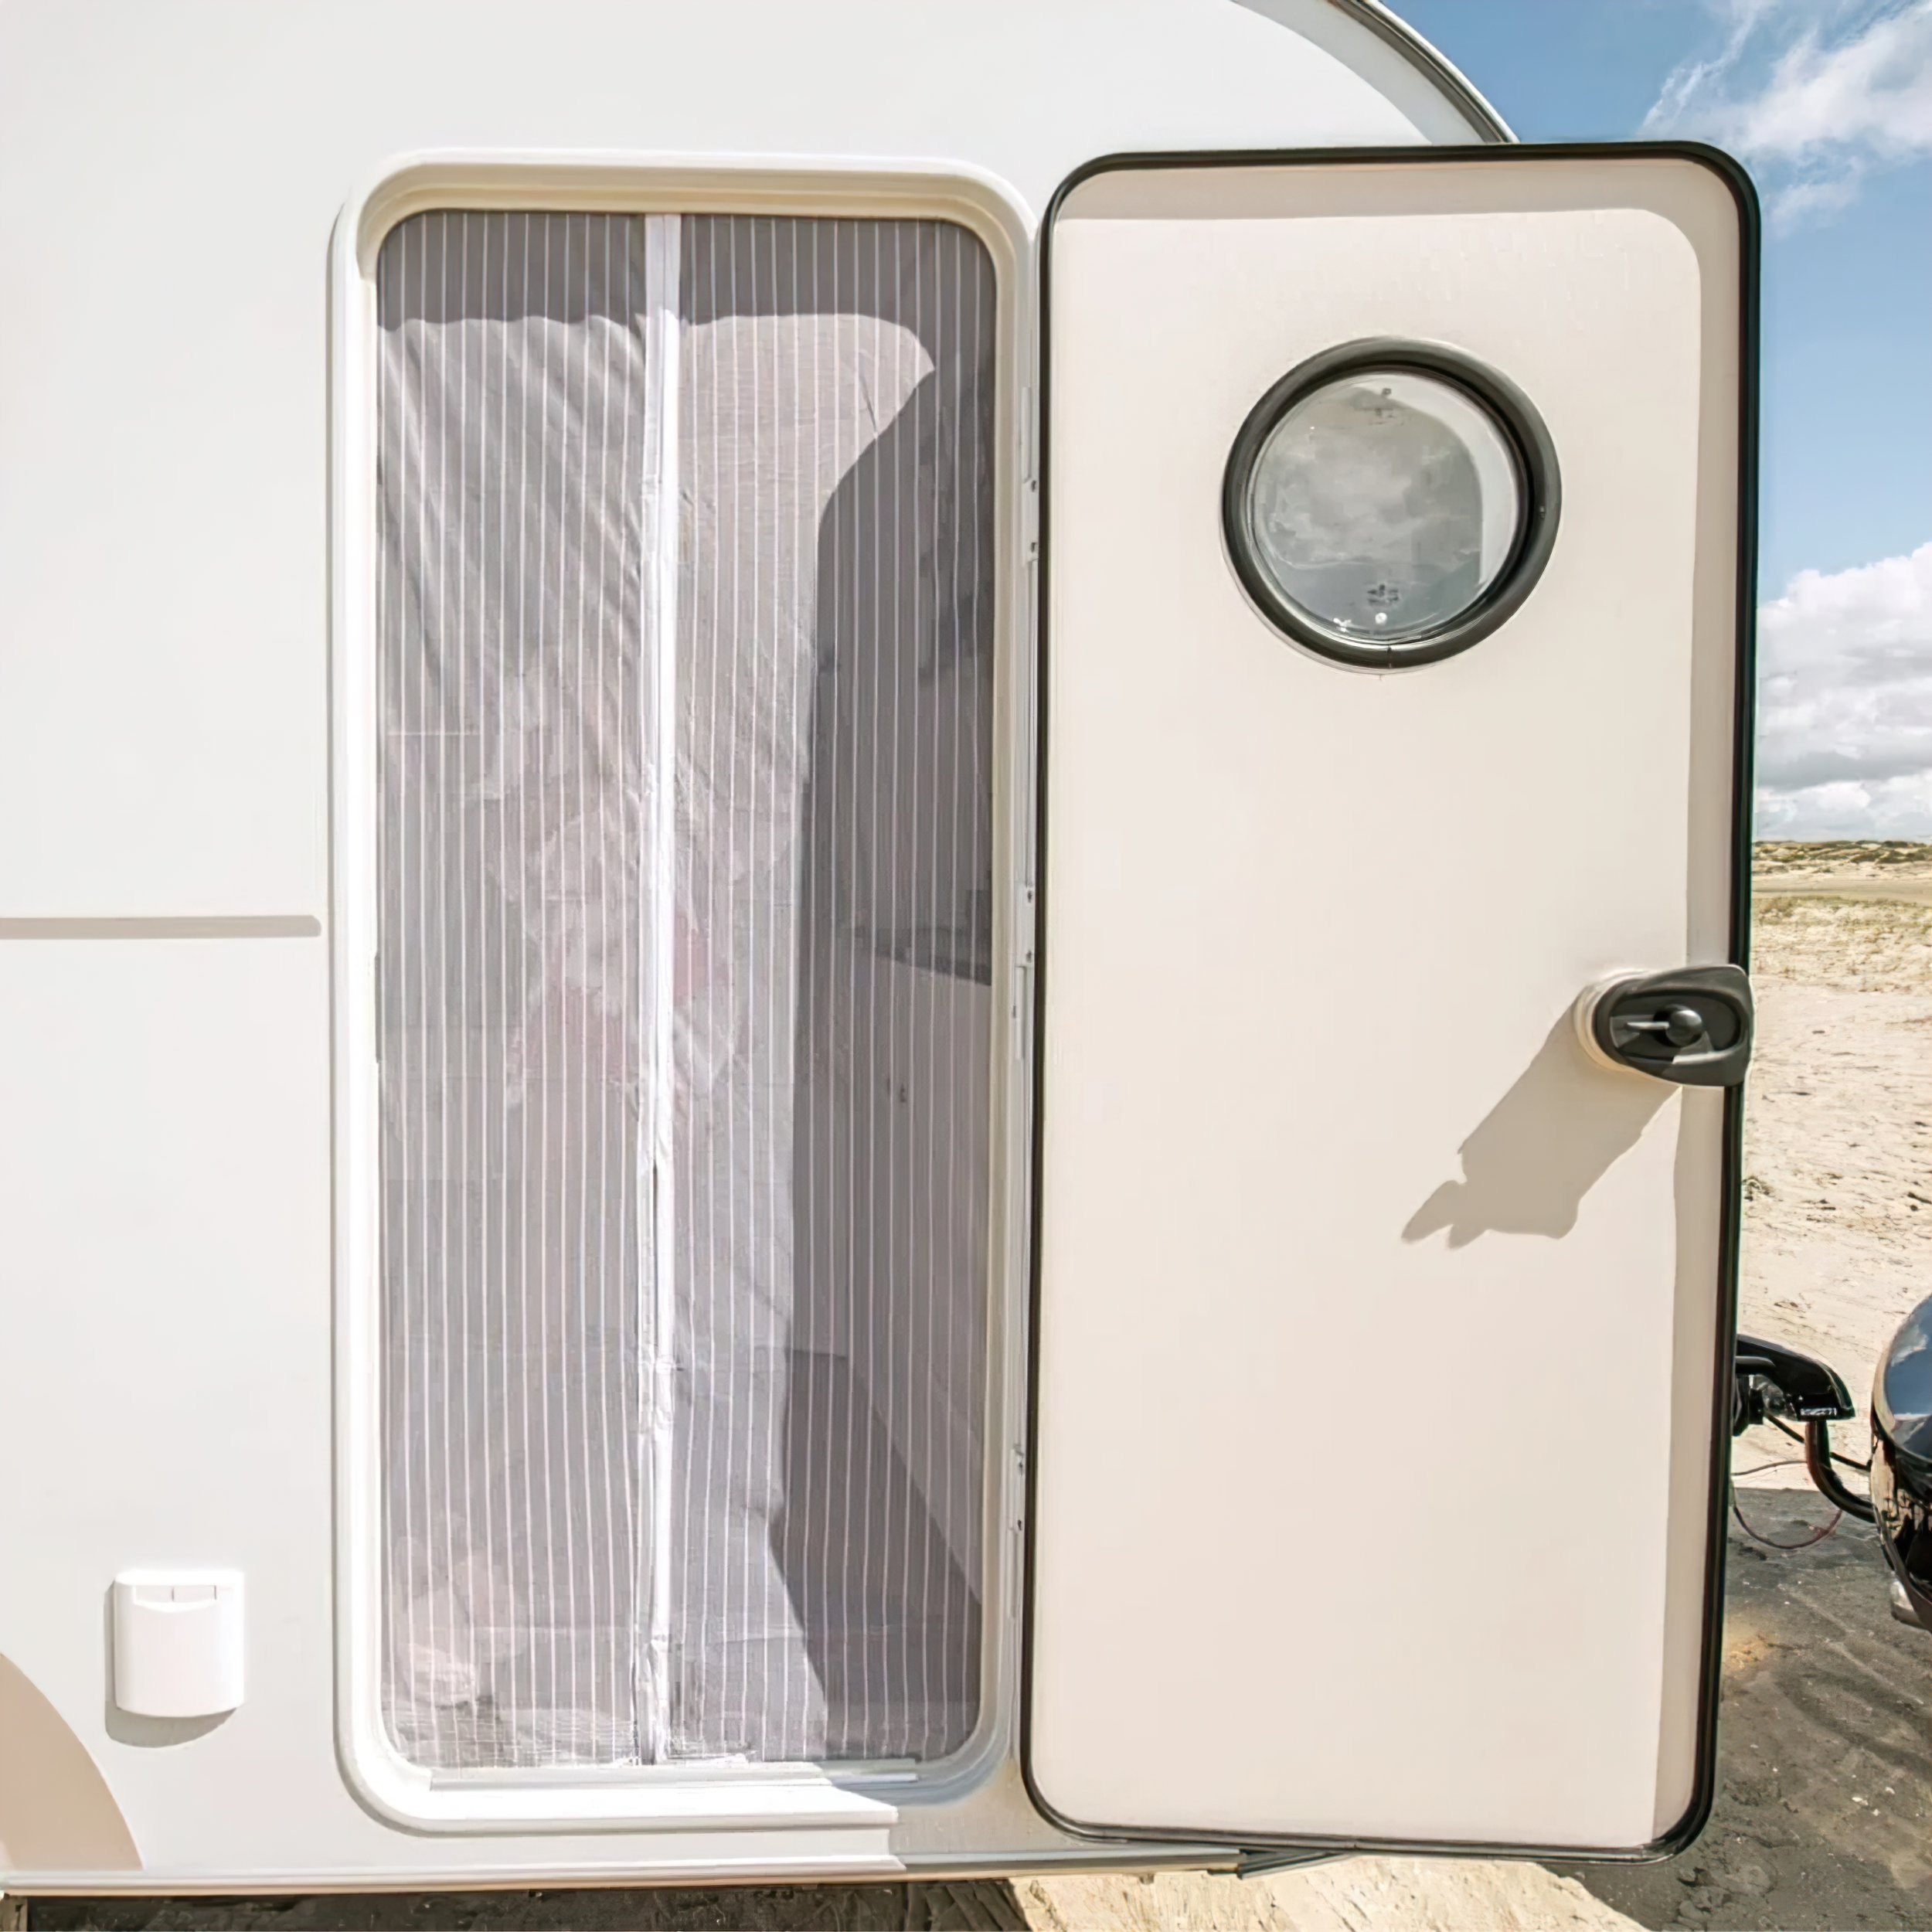  They've recently released their "Beachy" range, a stylish line of travel trailers dedicated to off-grid coastal adventures. 